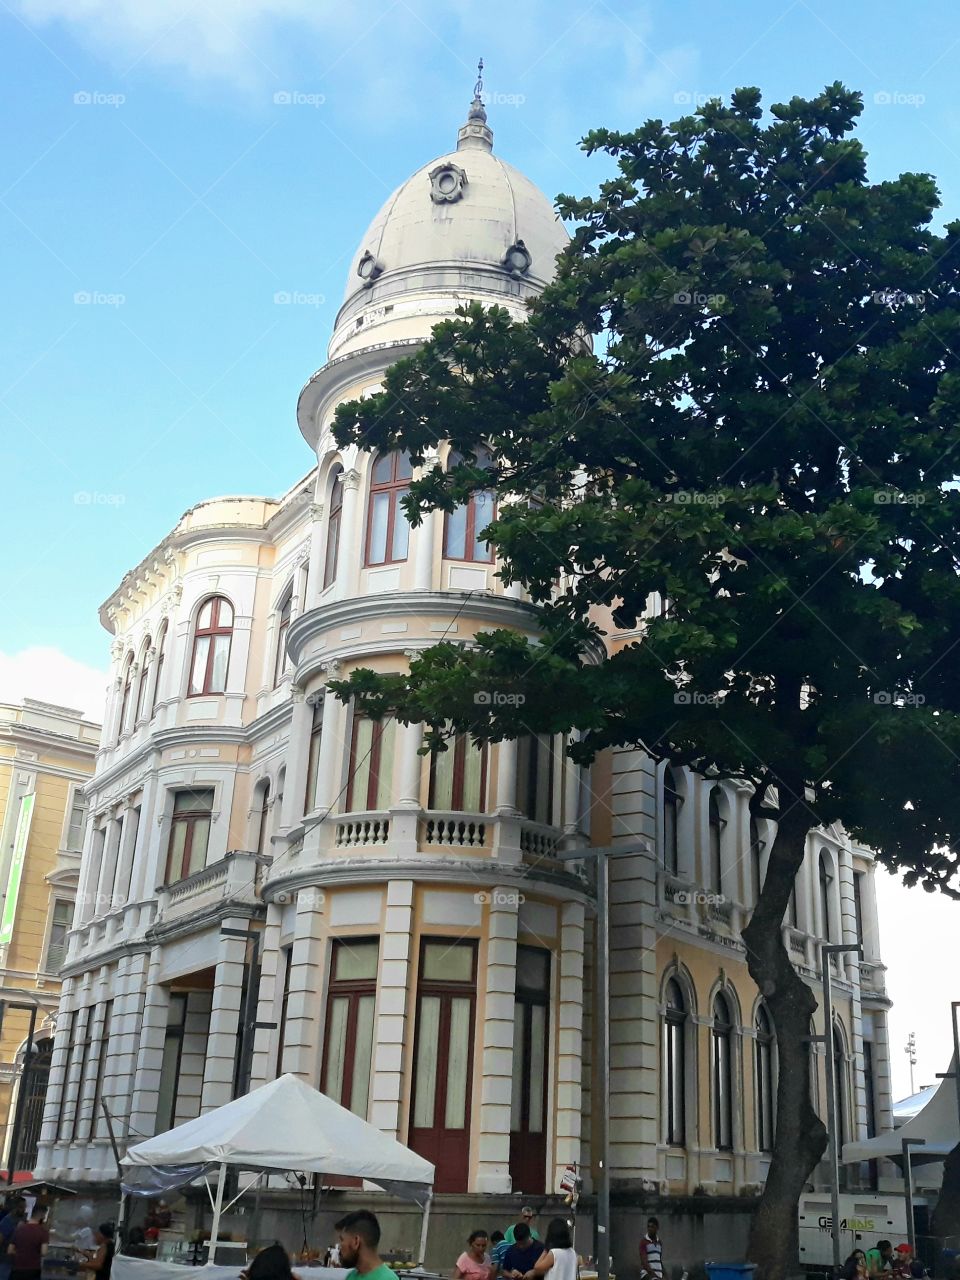 Historical building of the city of Recife located in the ground zero.